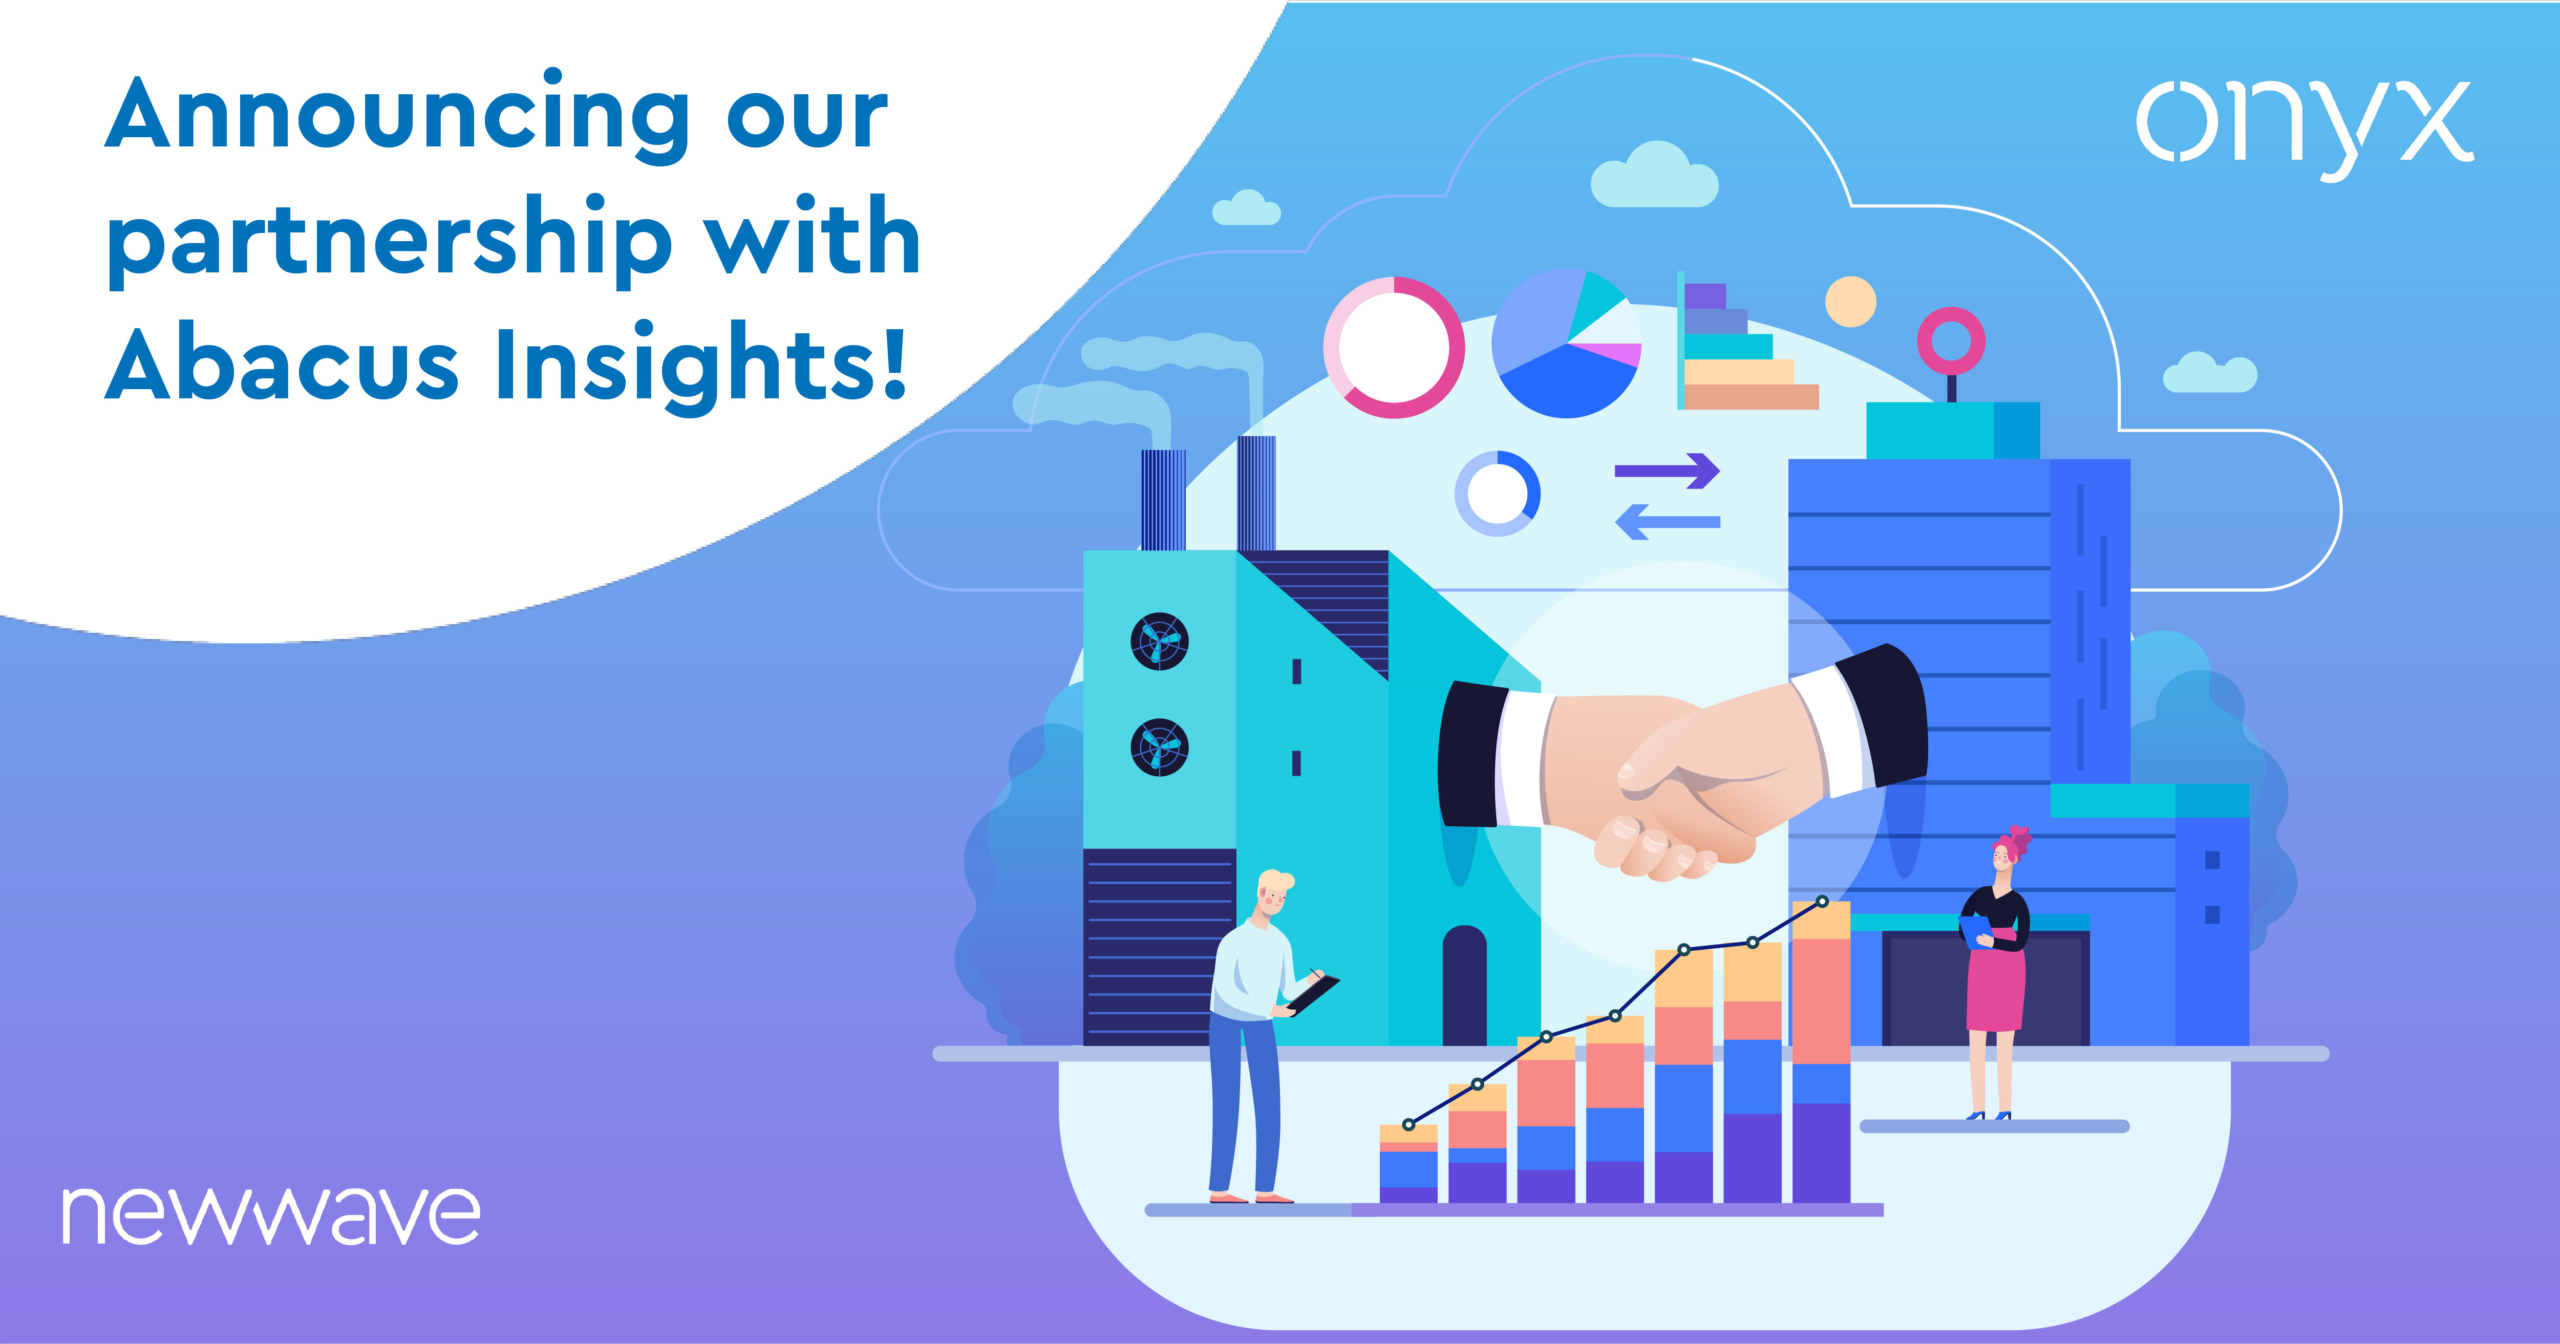 Announcing our partnership with Abacus Insights